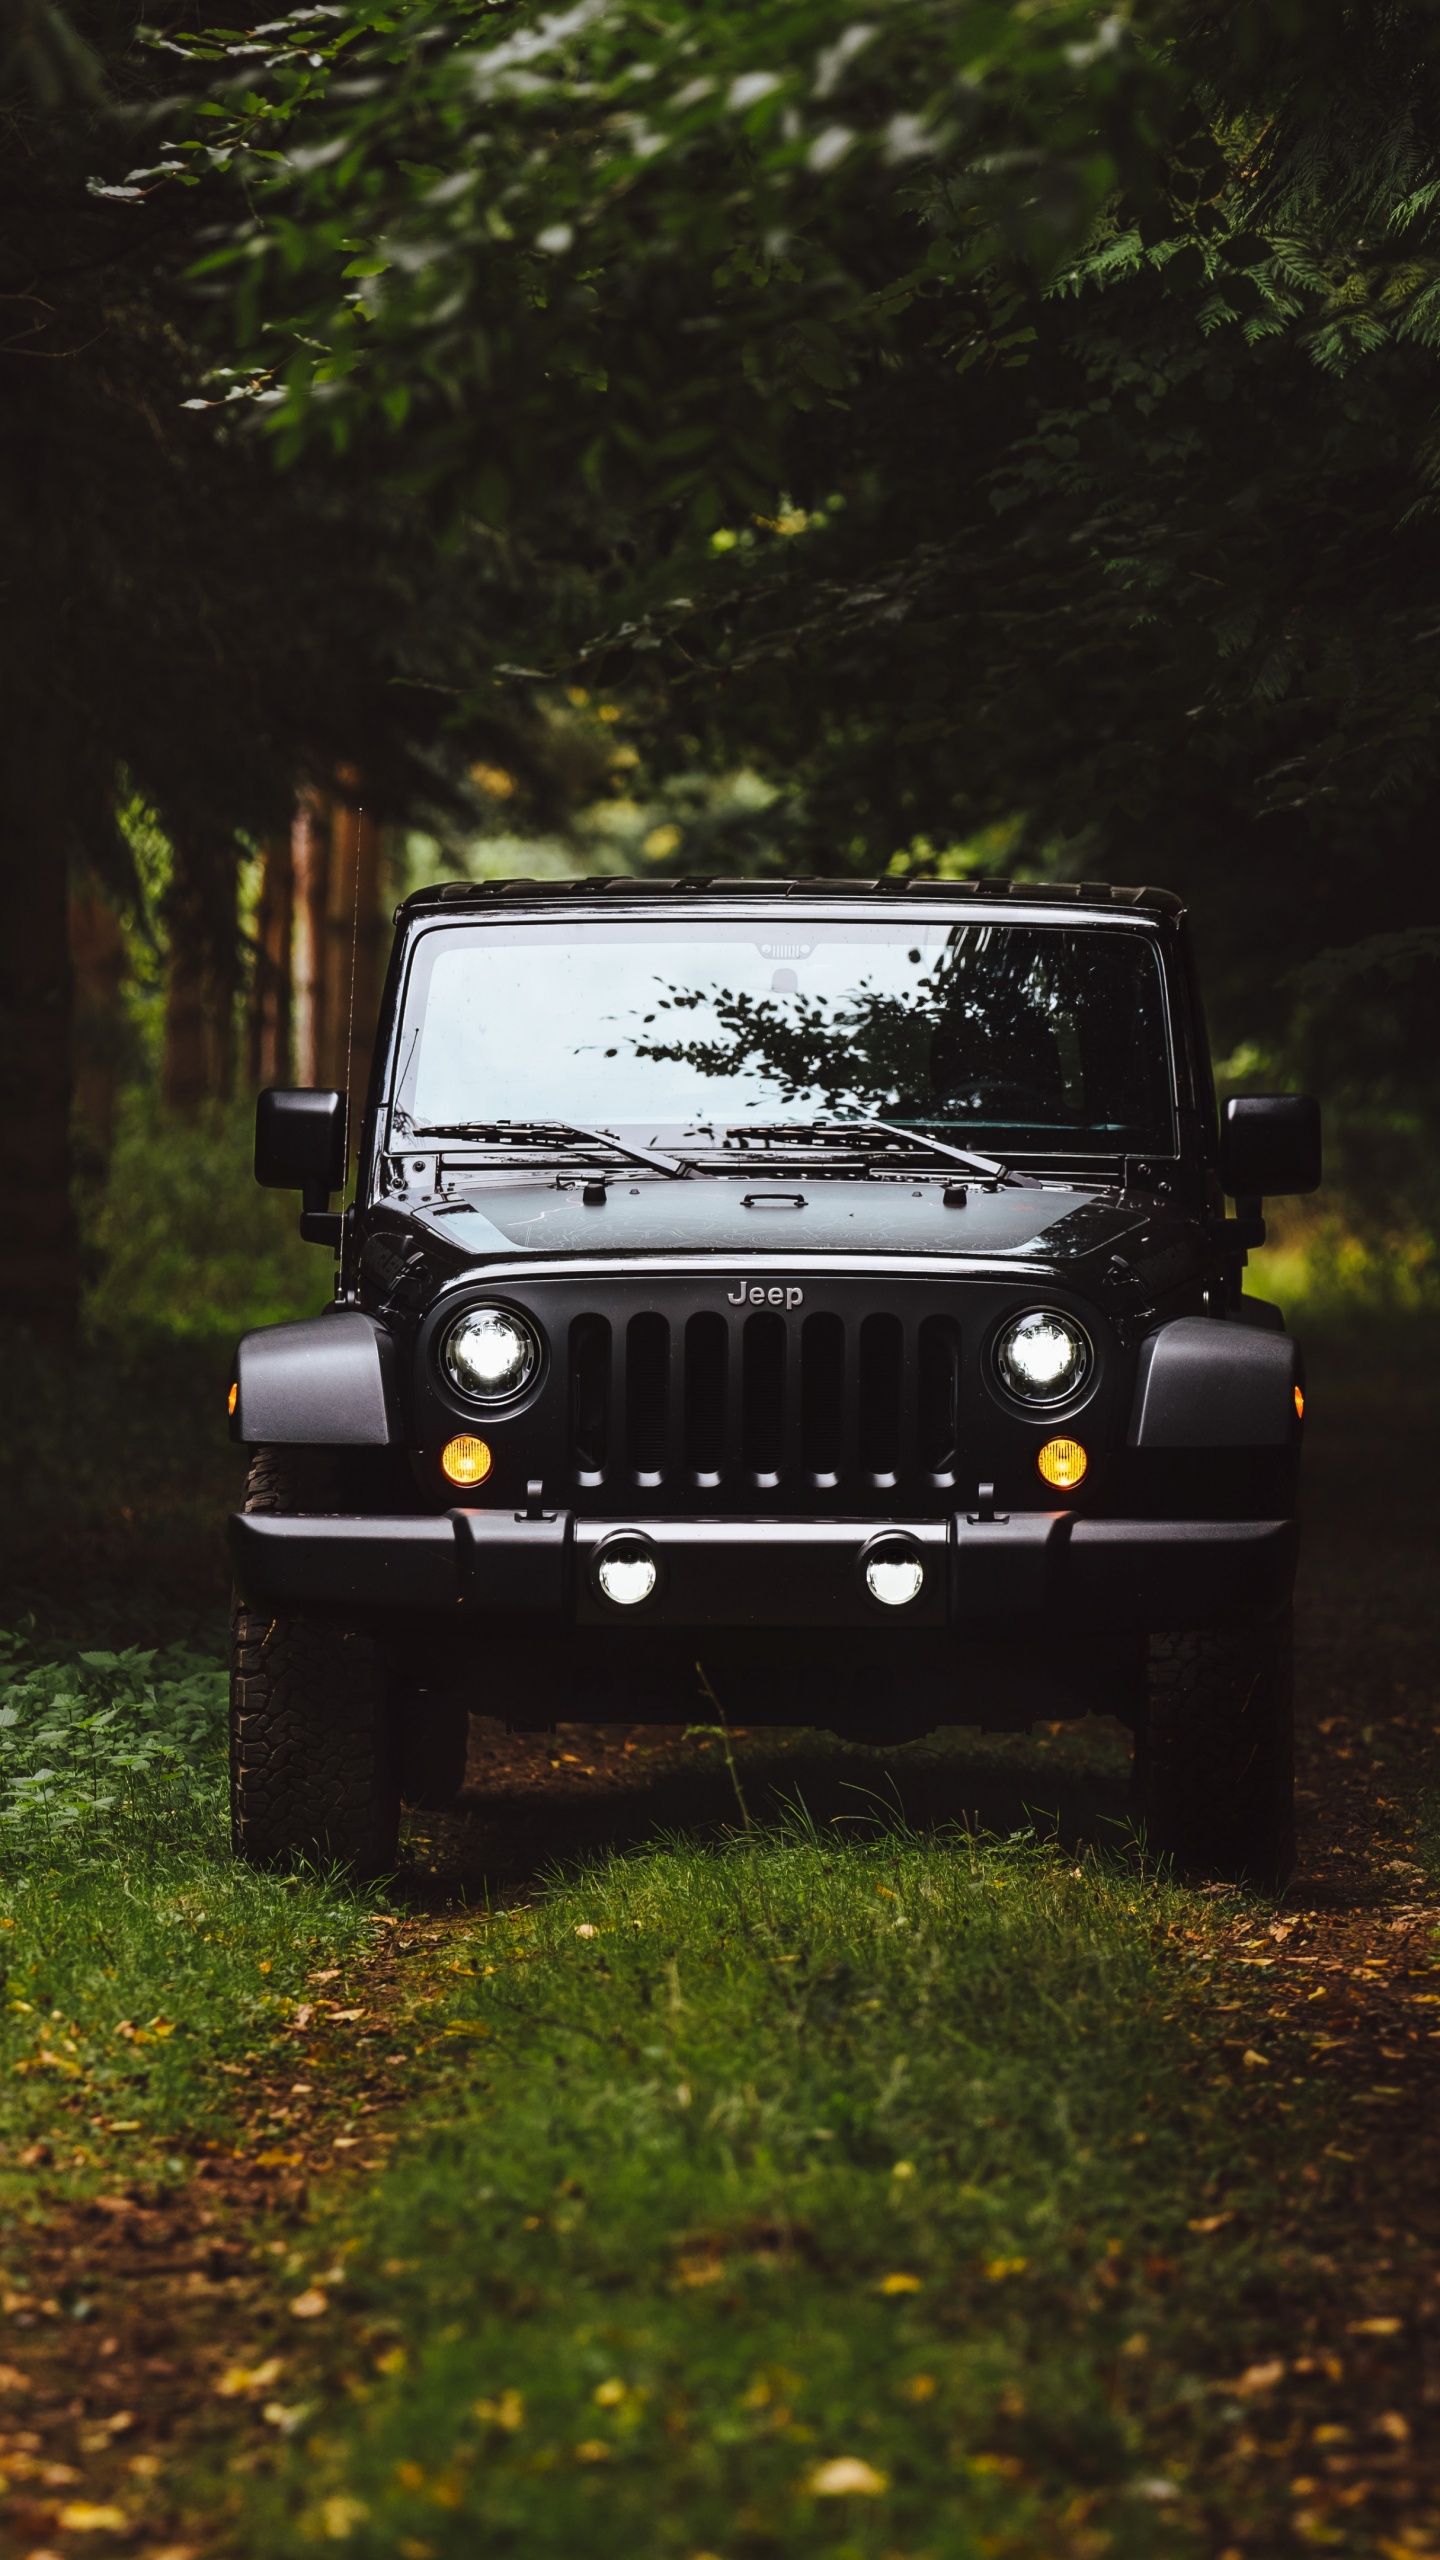 Black Jeep Wrangler on Green Grass Field Surrounded by Green Trees During Daytime. Wallpaper in 1440x2560 Resolution